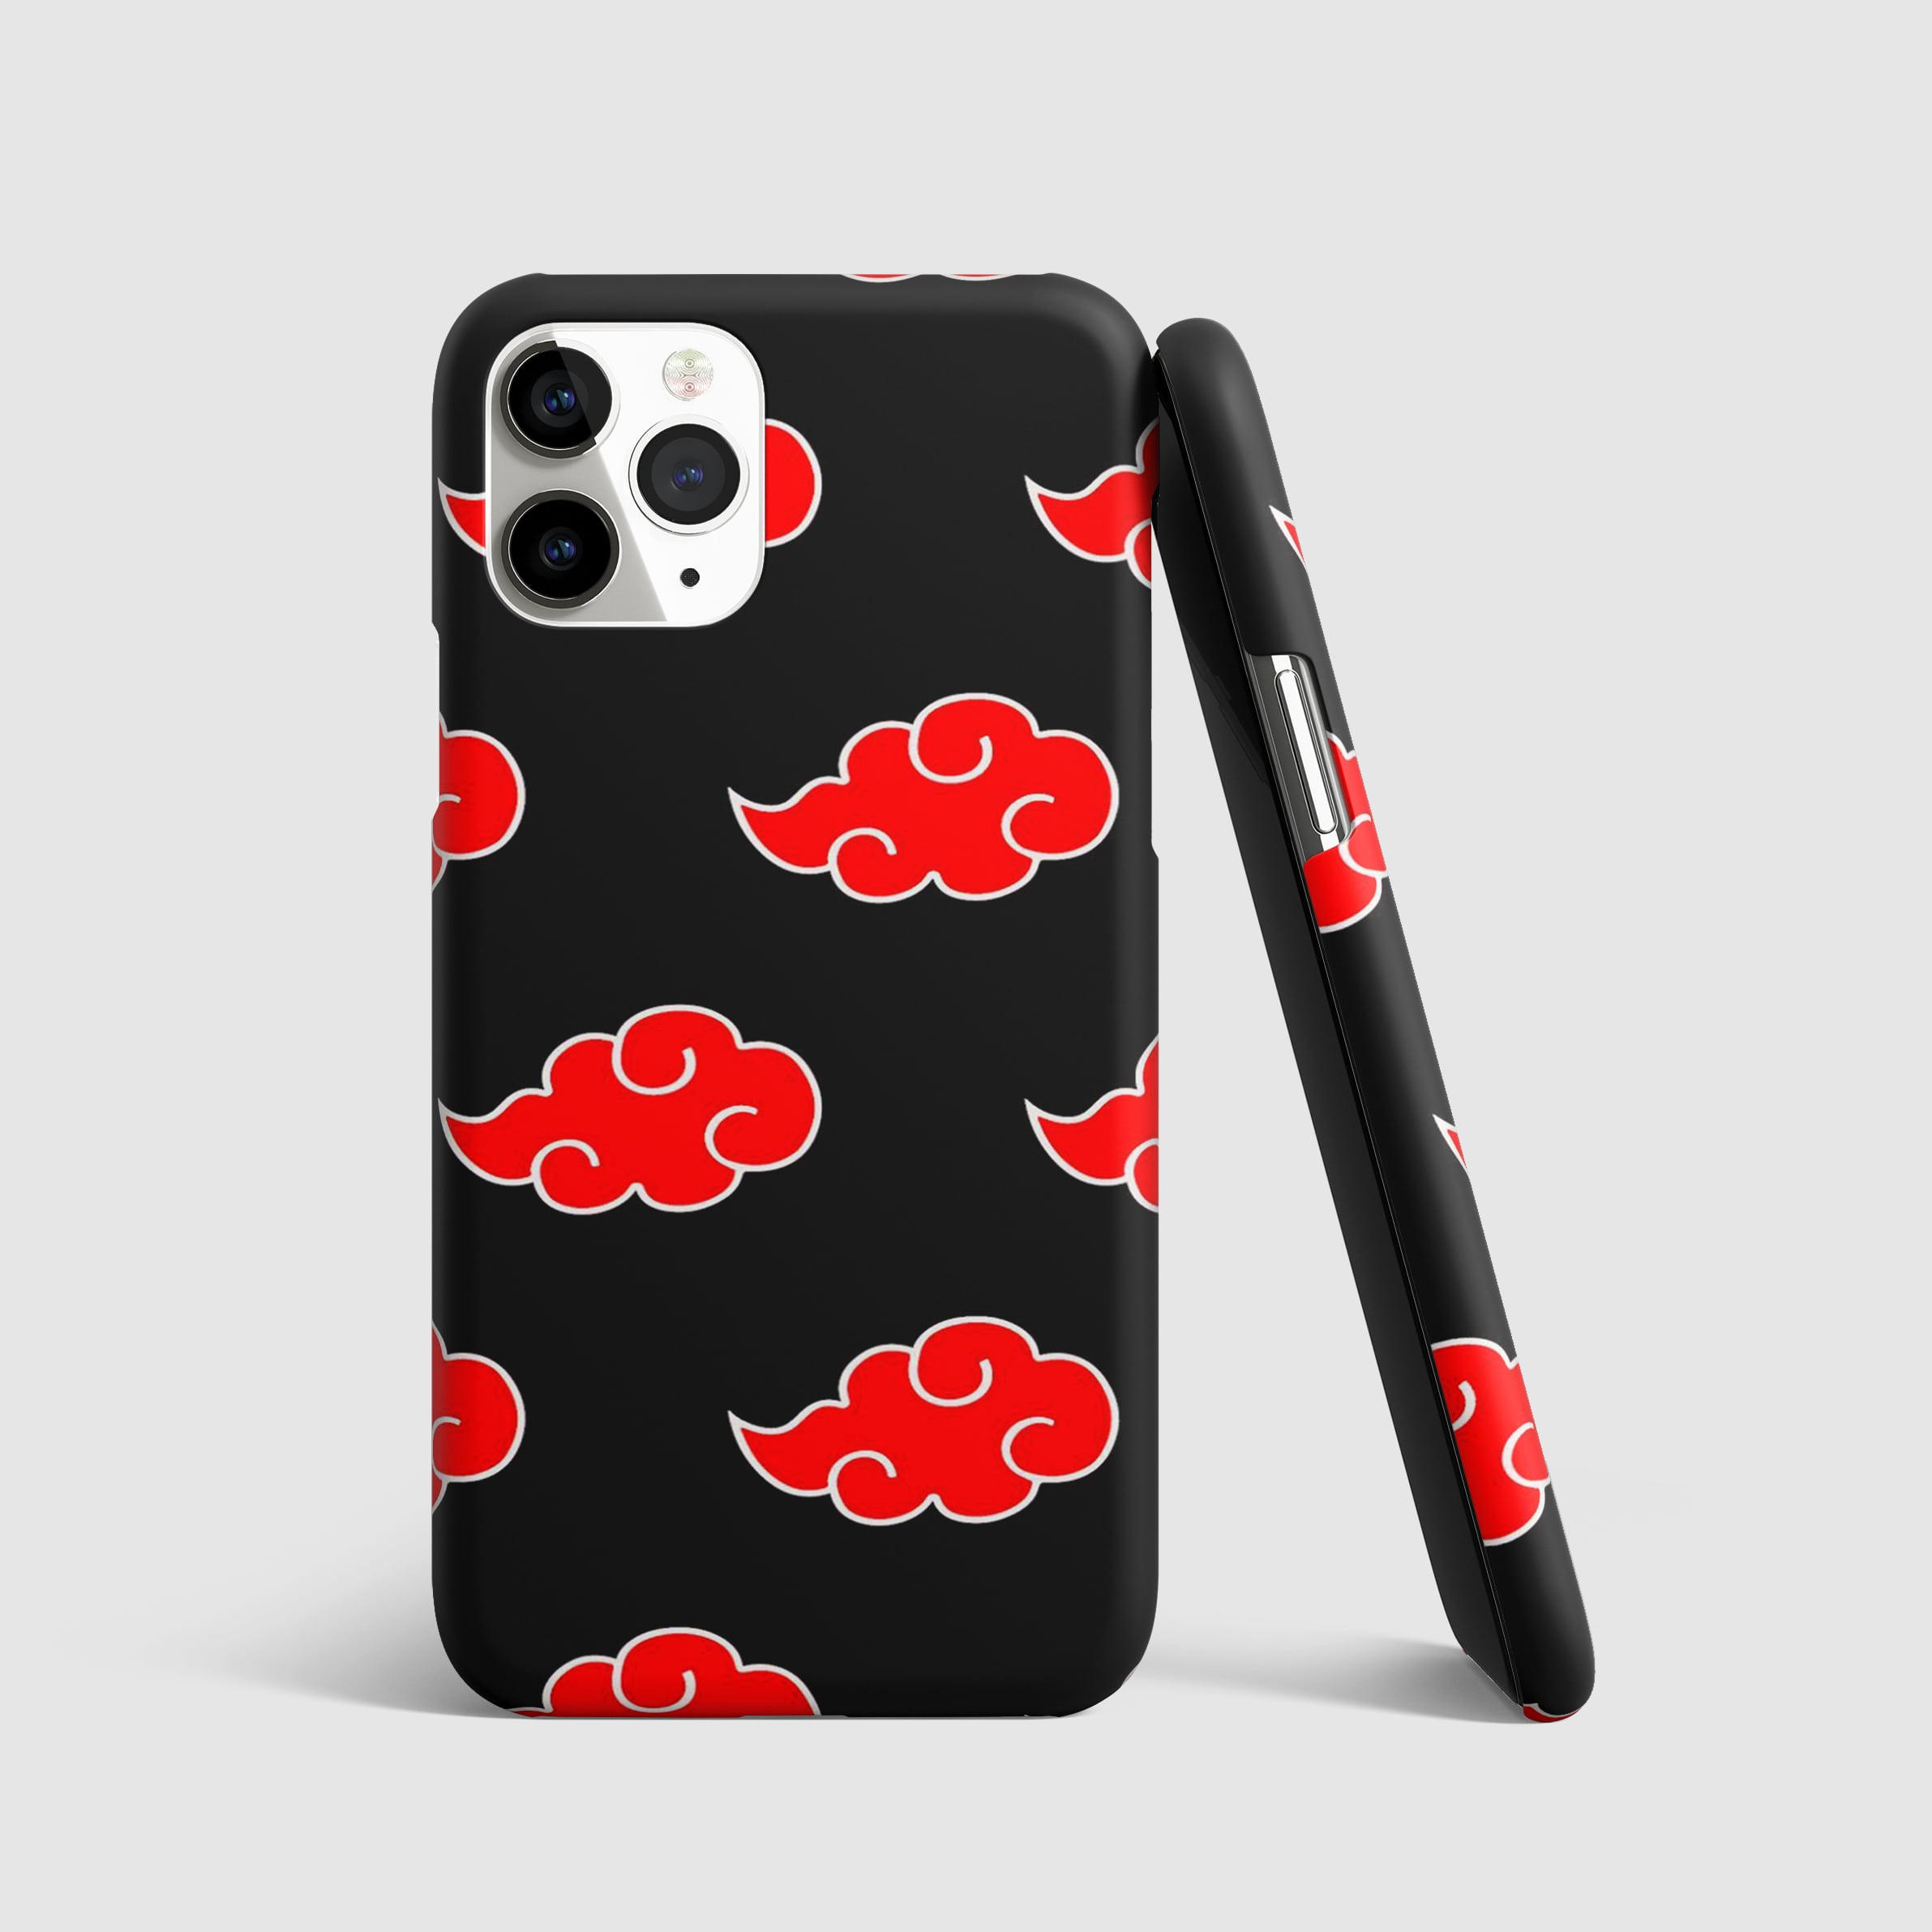 Akatsuki Red Cloud Phone Cover with 3D matte finish, featuring the iconic red cloud design.